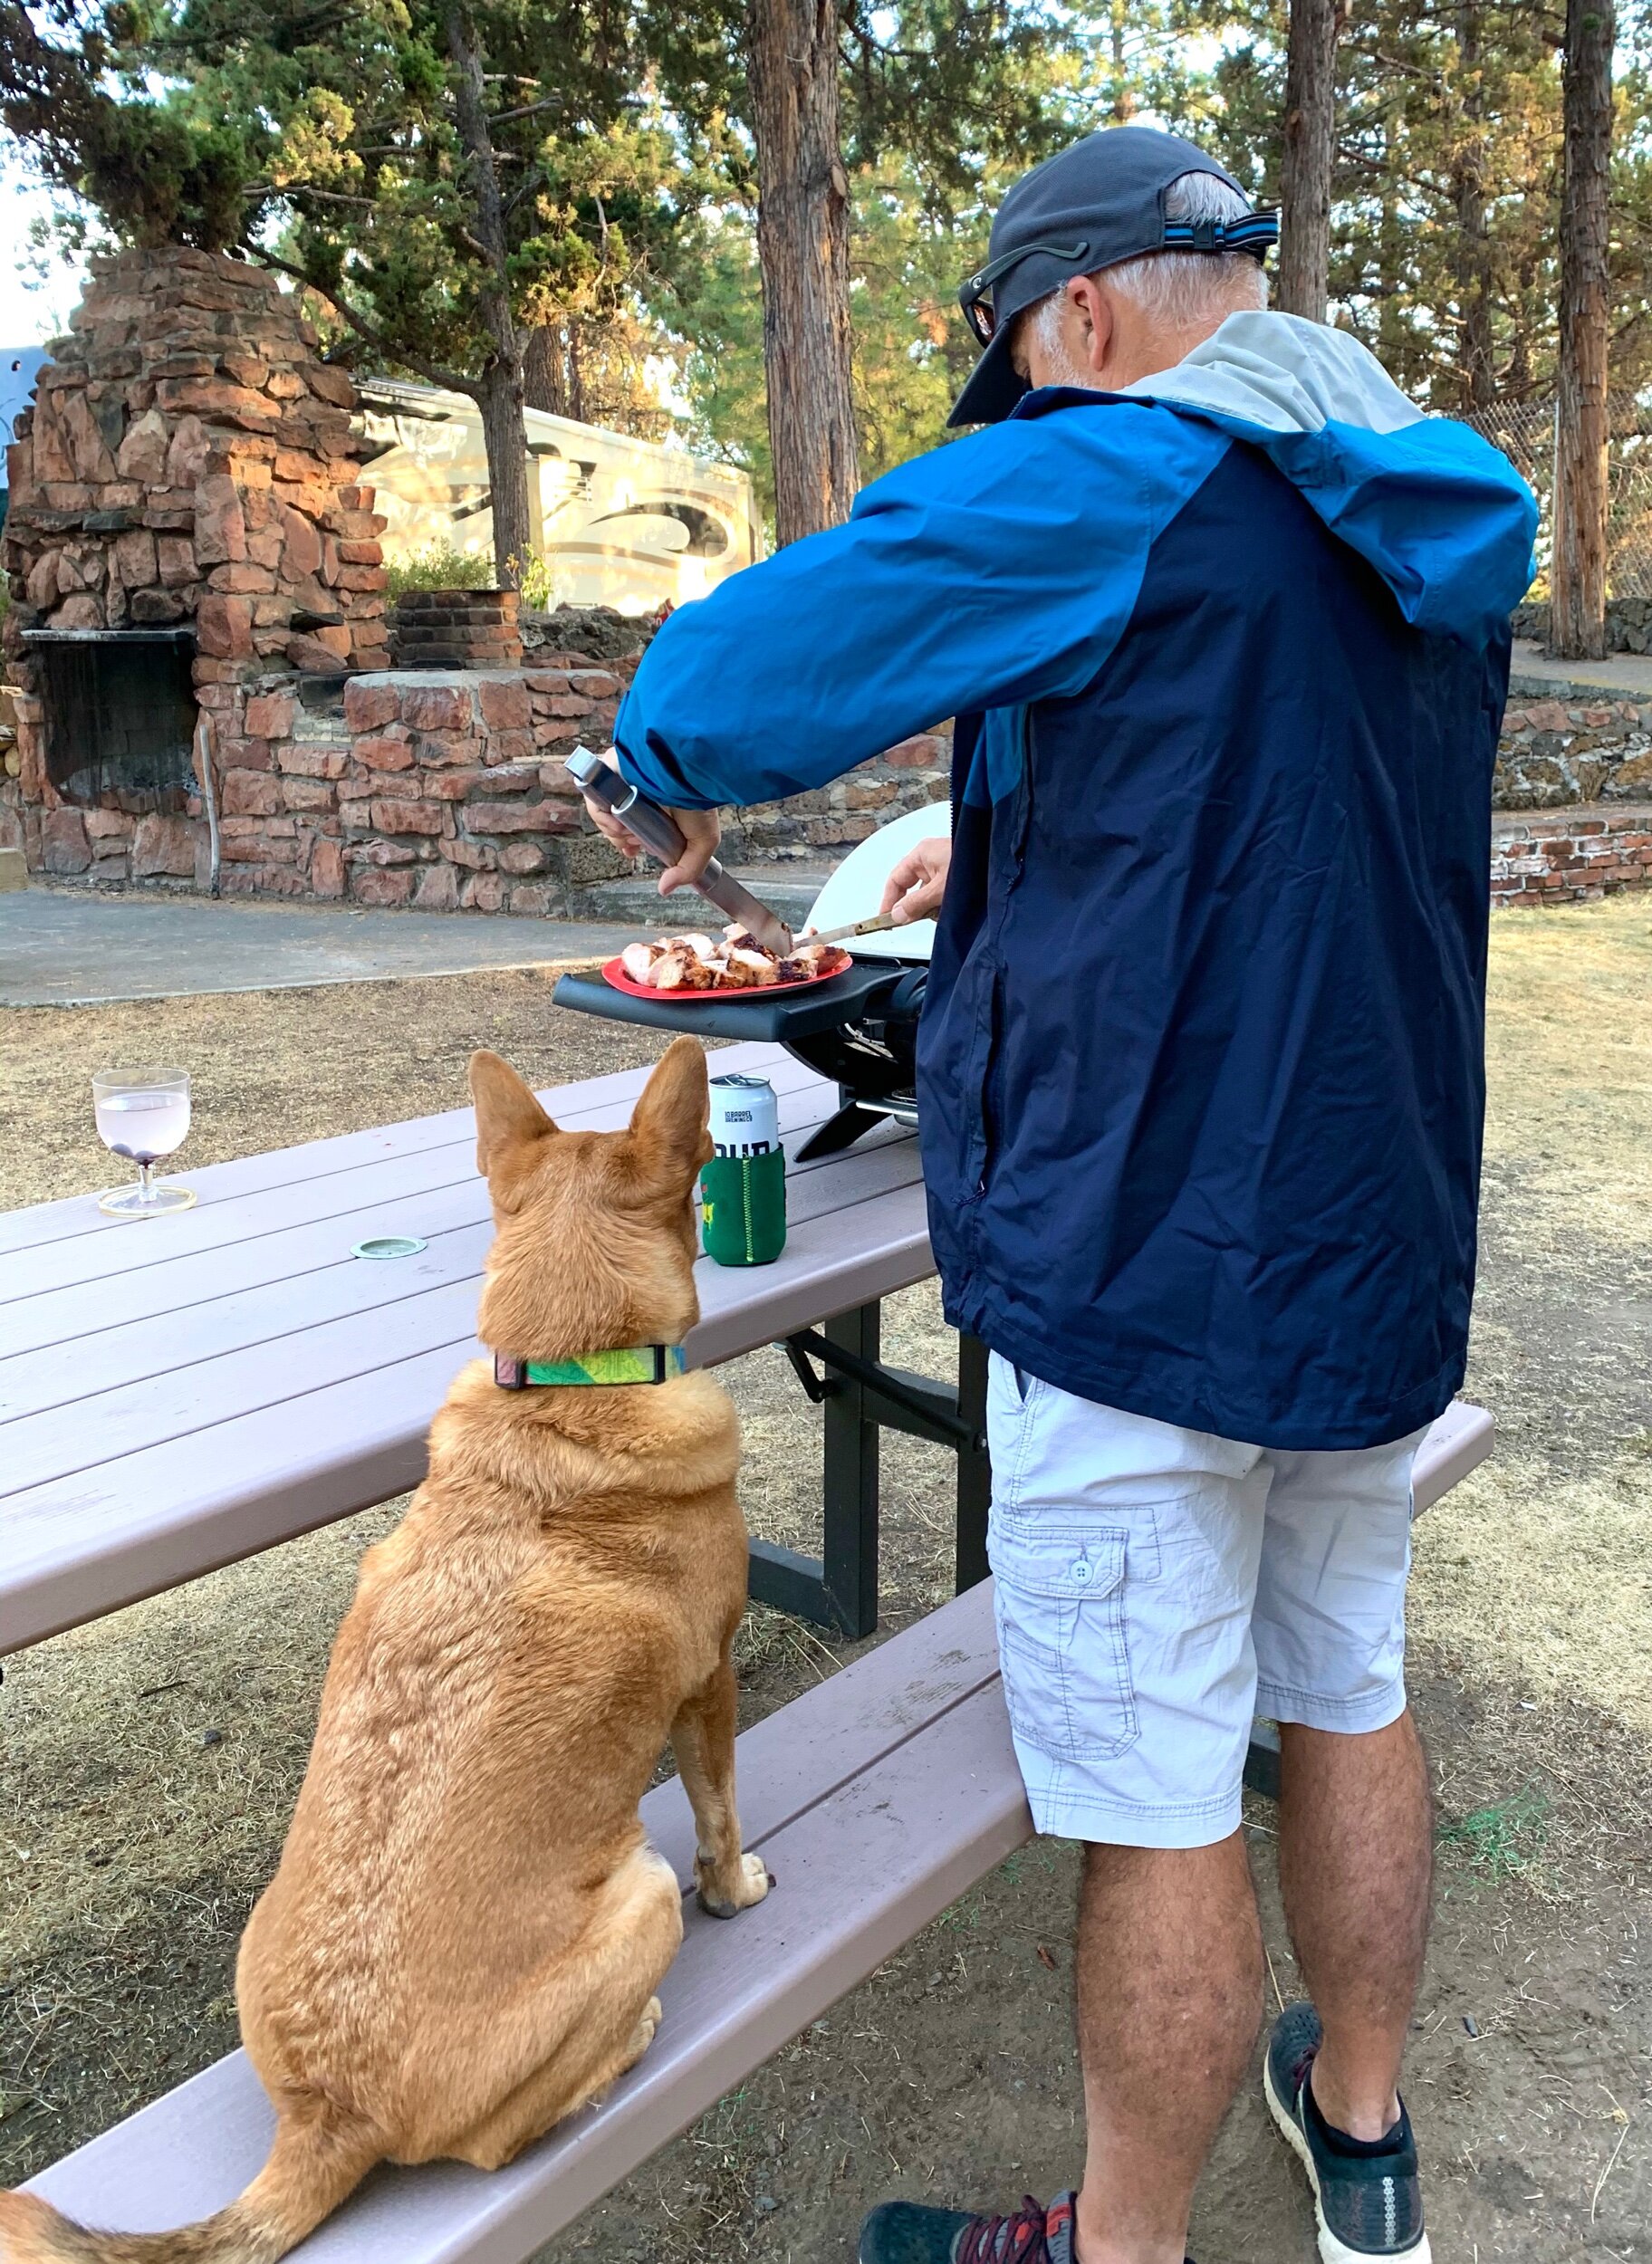  We enjoyed taking it easy for a few days in the quaint town of Bend .  Here, Clay waits for Craig to finish cooking what he believes to be “his” dinner. 